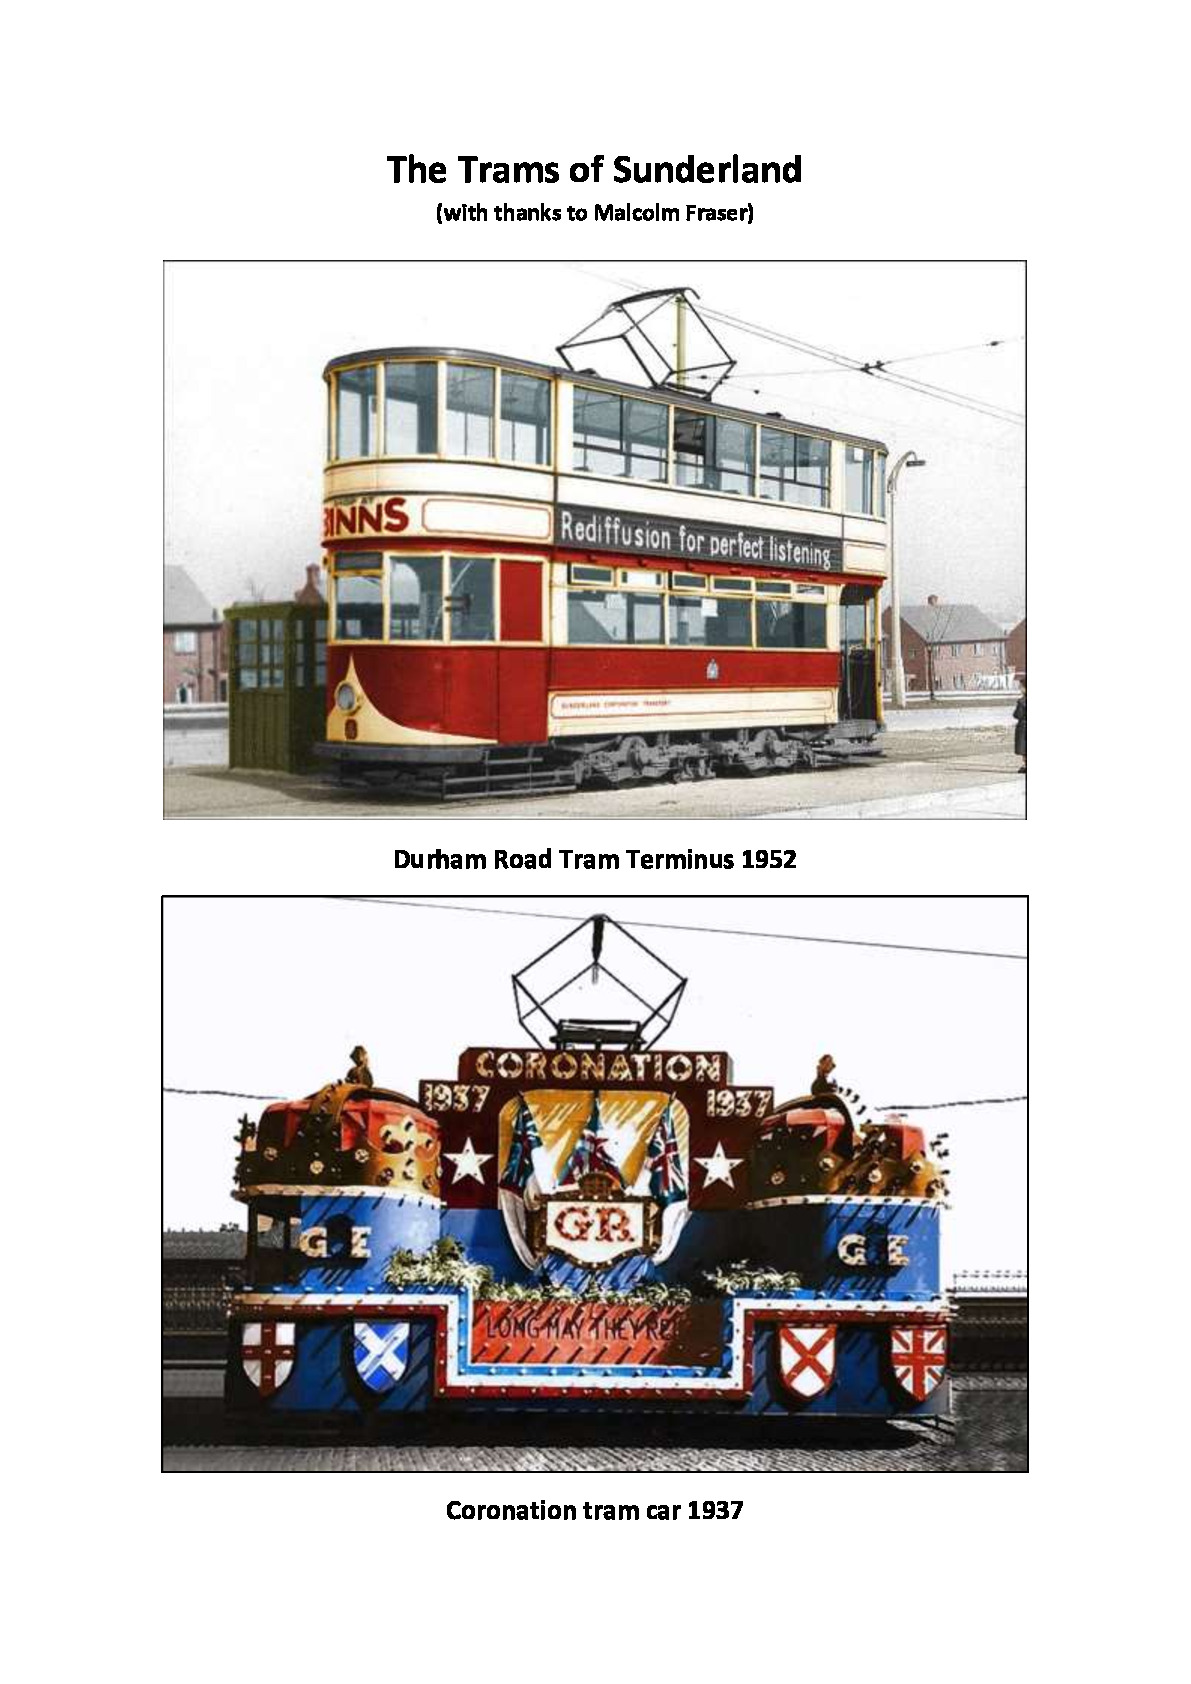 The Old Trams of Sunderland (72 colour images incl. views of the old town)